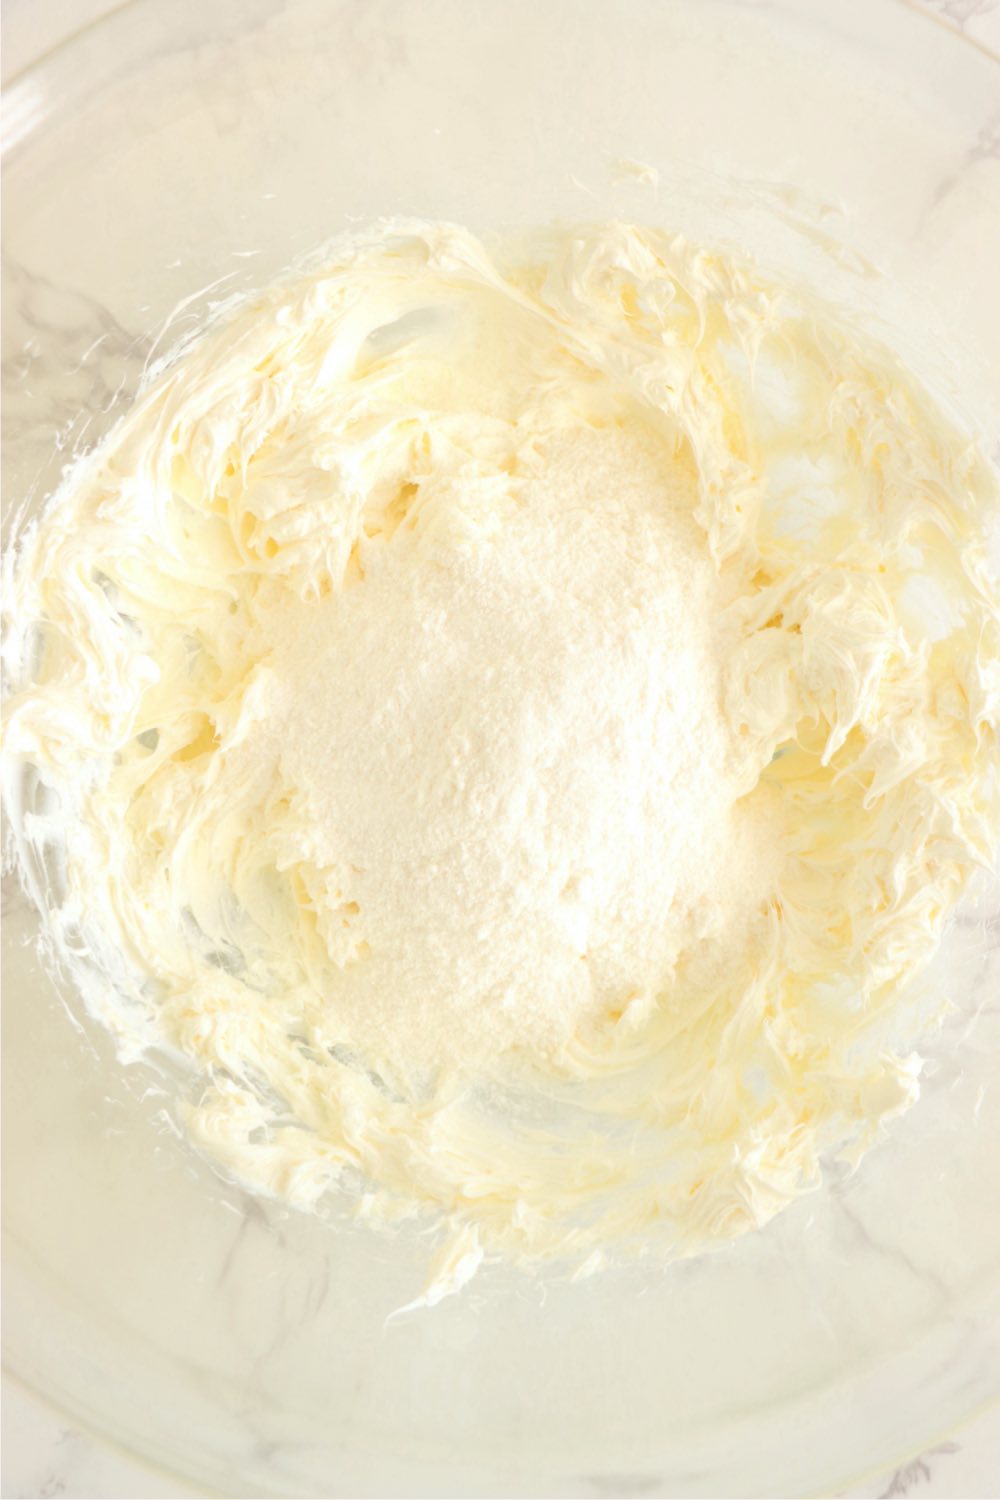 Banana pudding mix on top of whipped cream cheese in a mixing bowl.